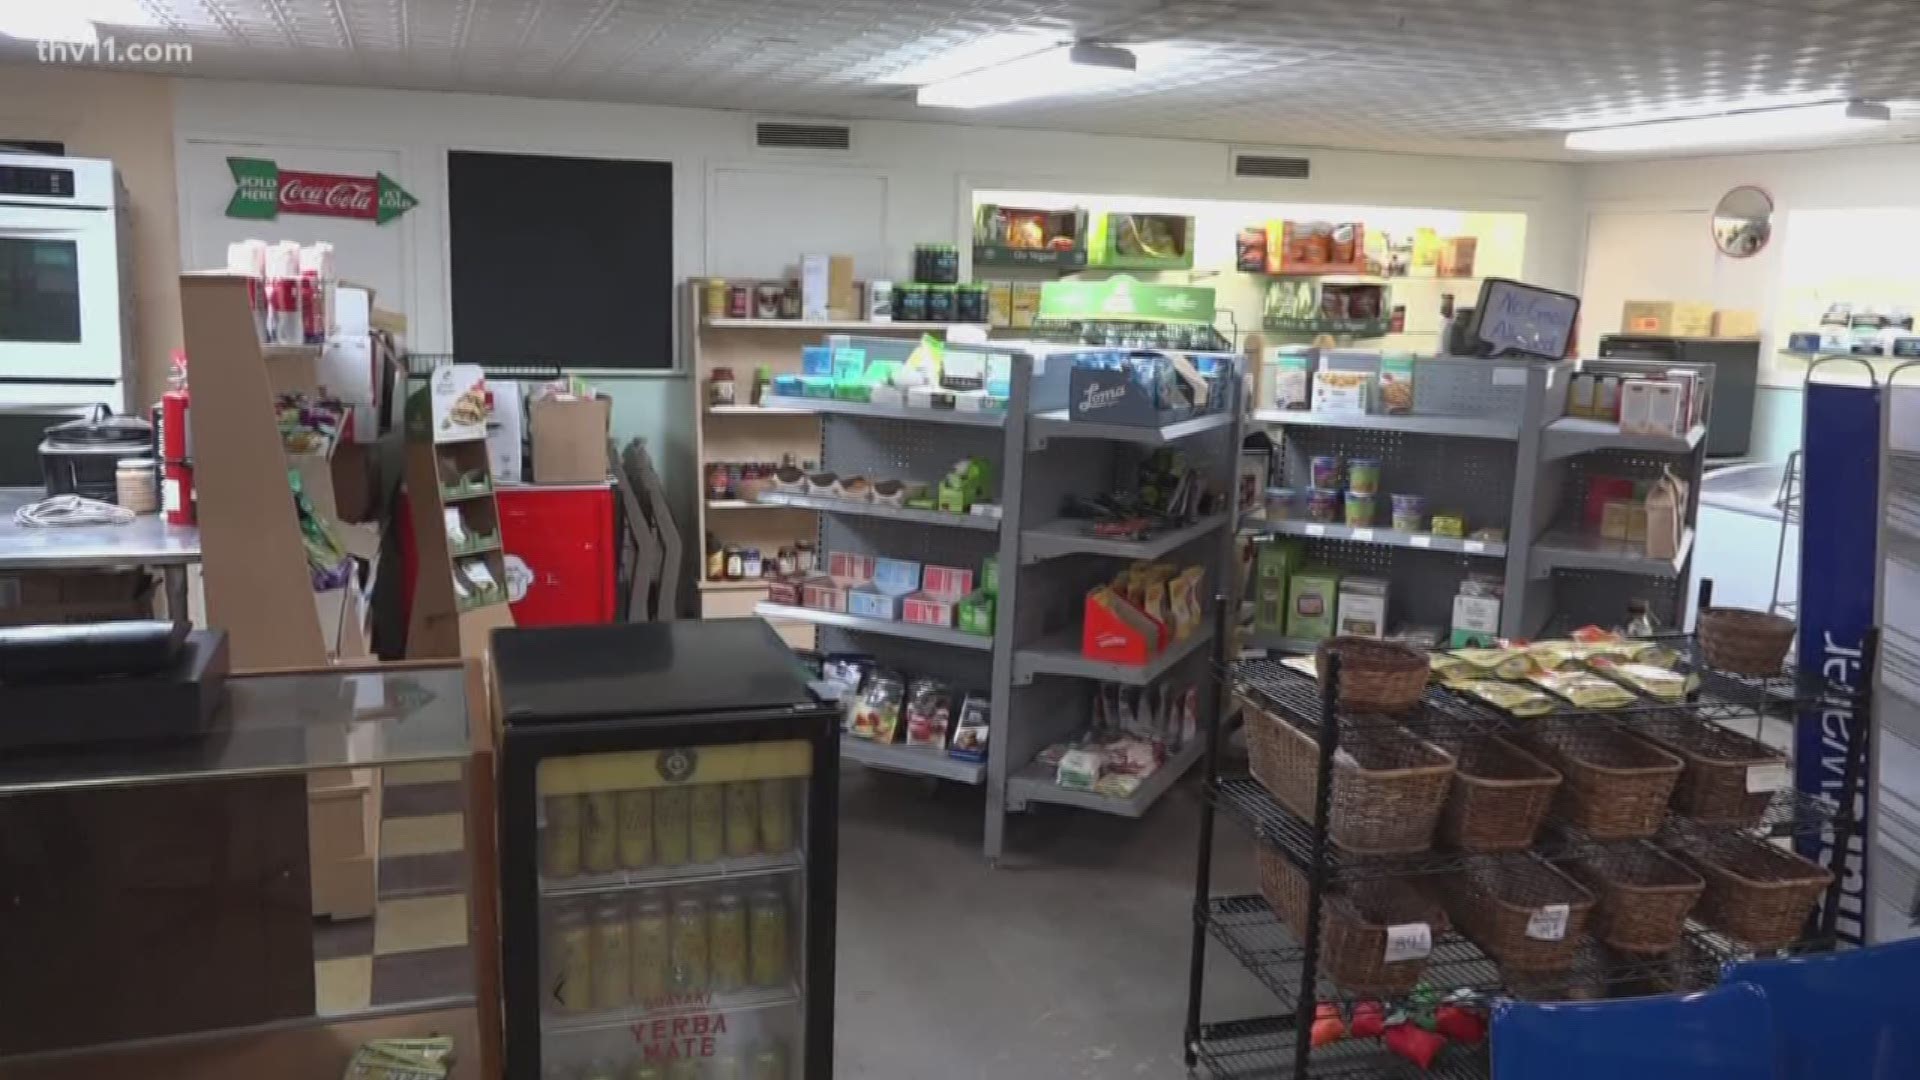 In downtown North Little Rock, there are essentially no grocery stores nearby. But soon, one couple is relocating their business to give people a new option.